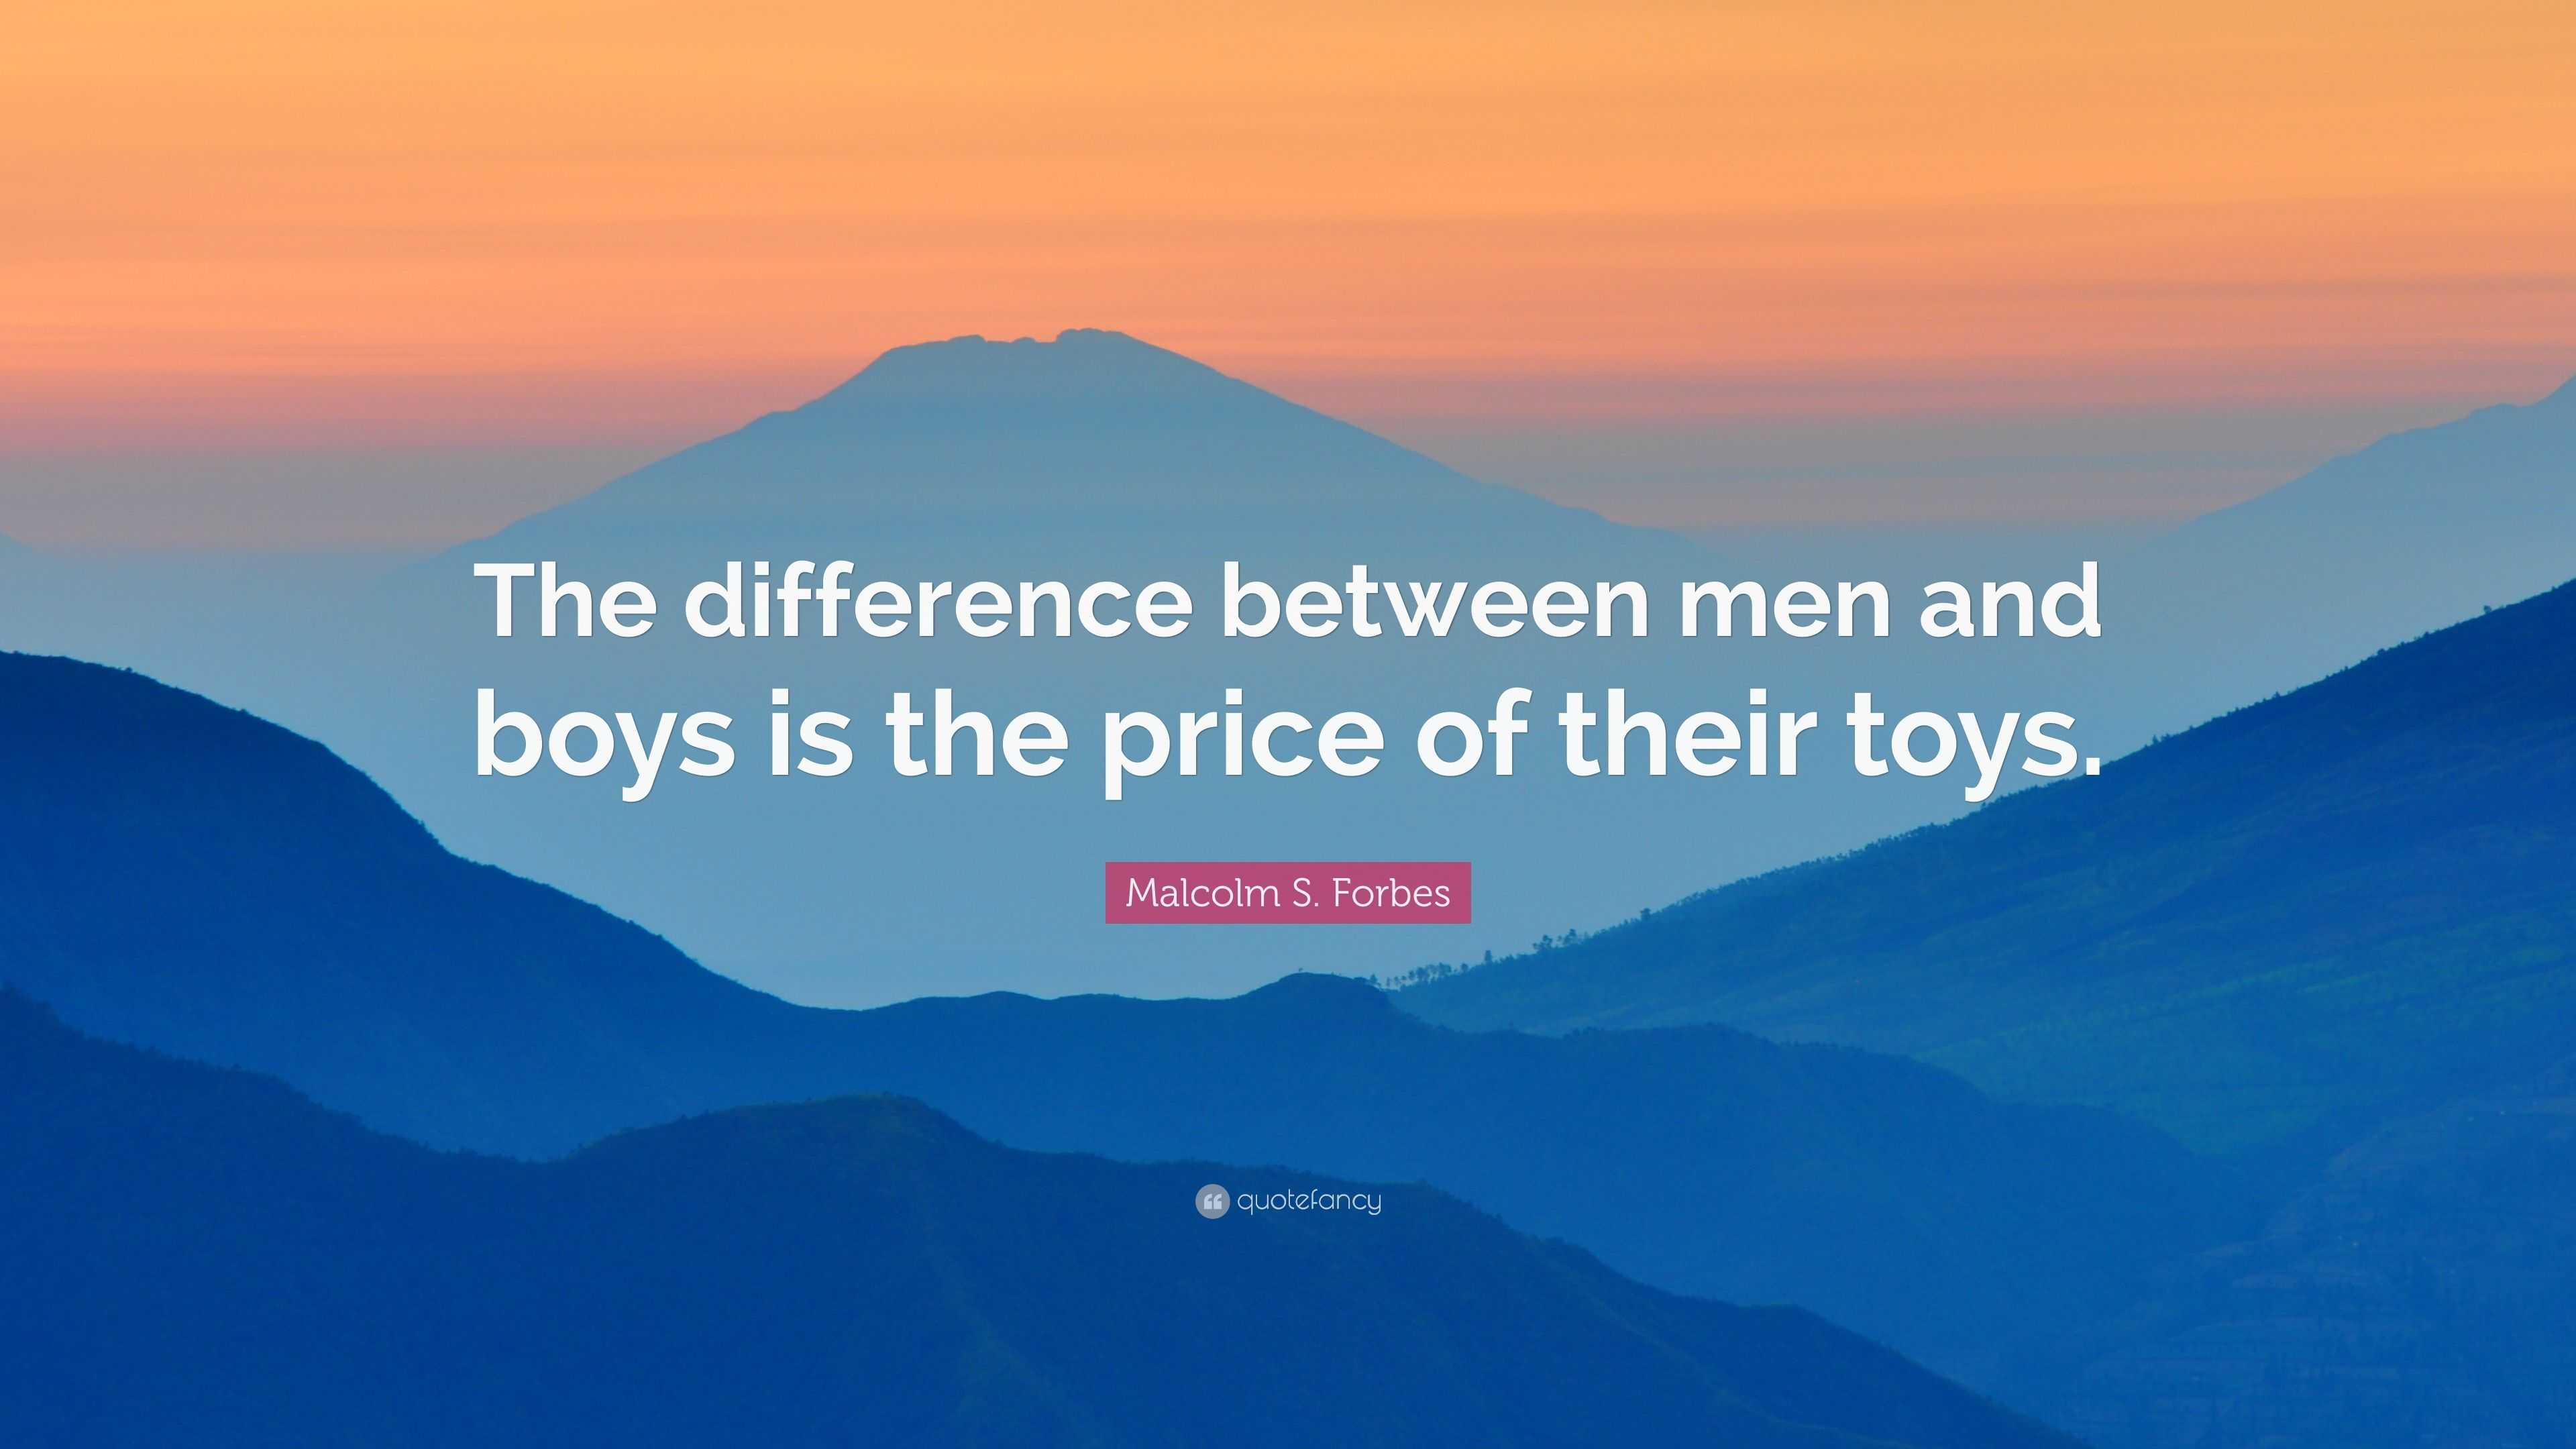 Malcolm S. Forbes Quote: “The difference between men and boys is the